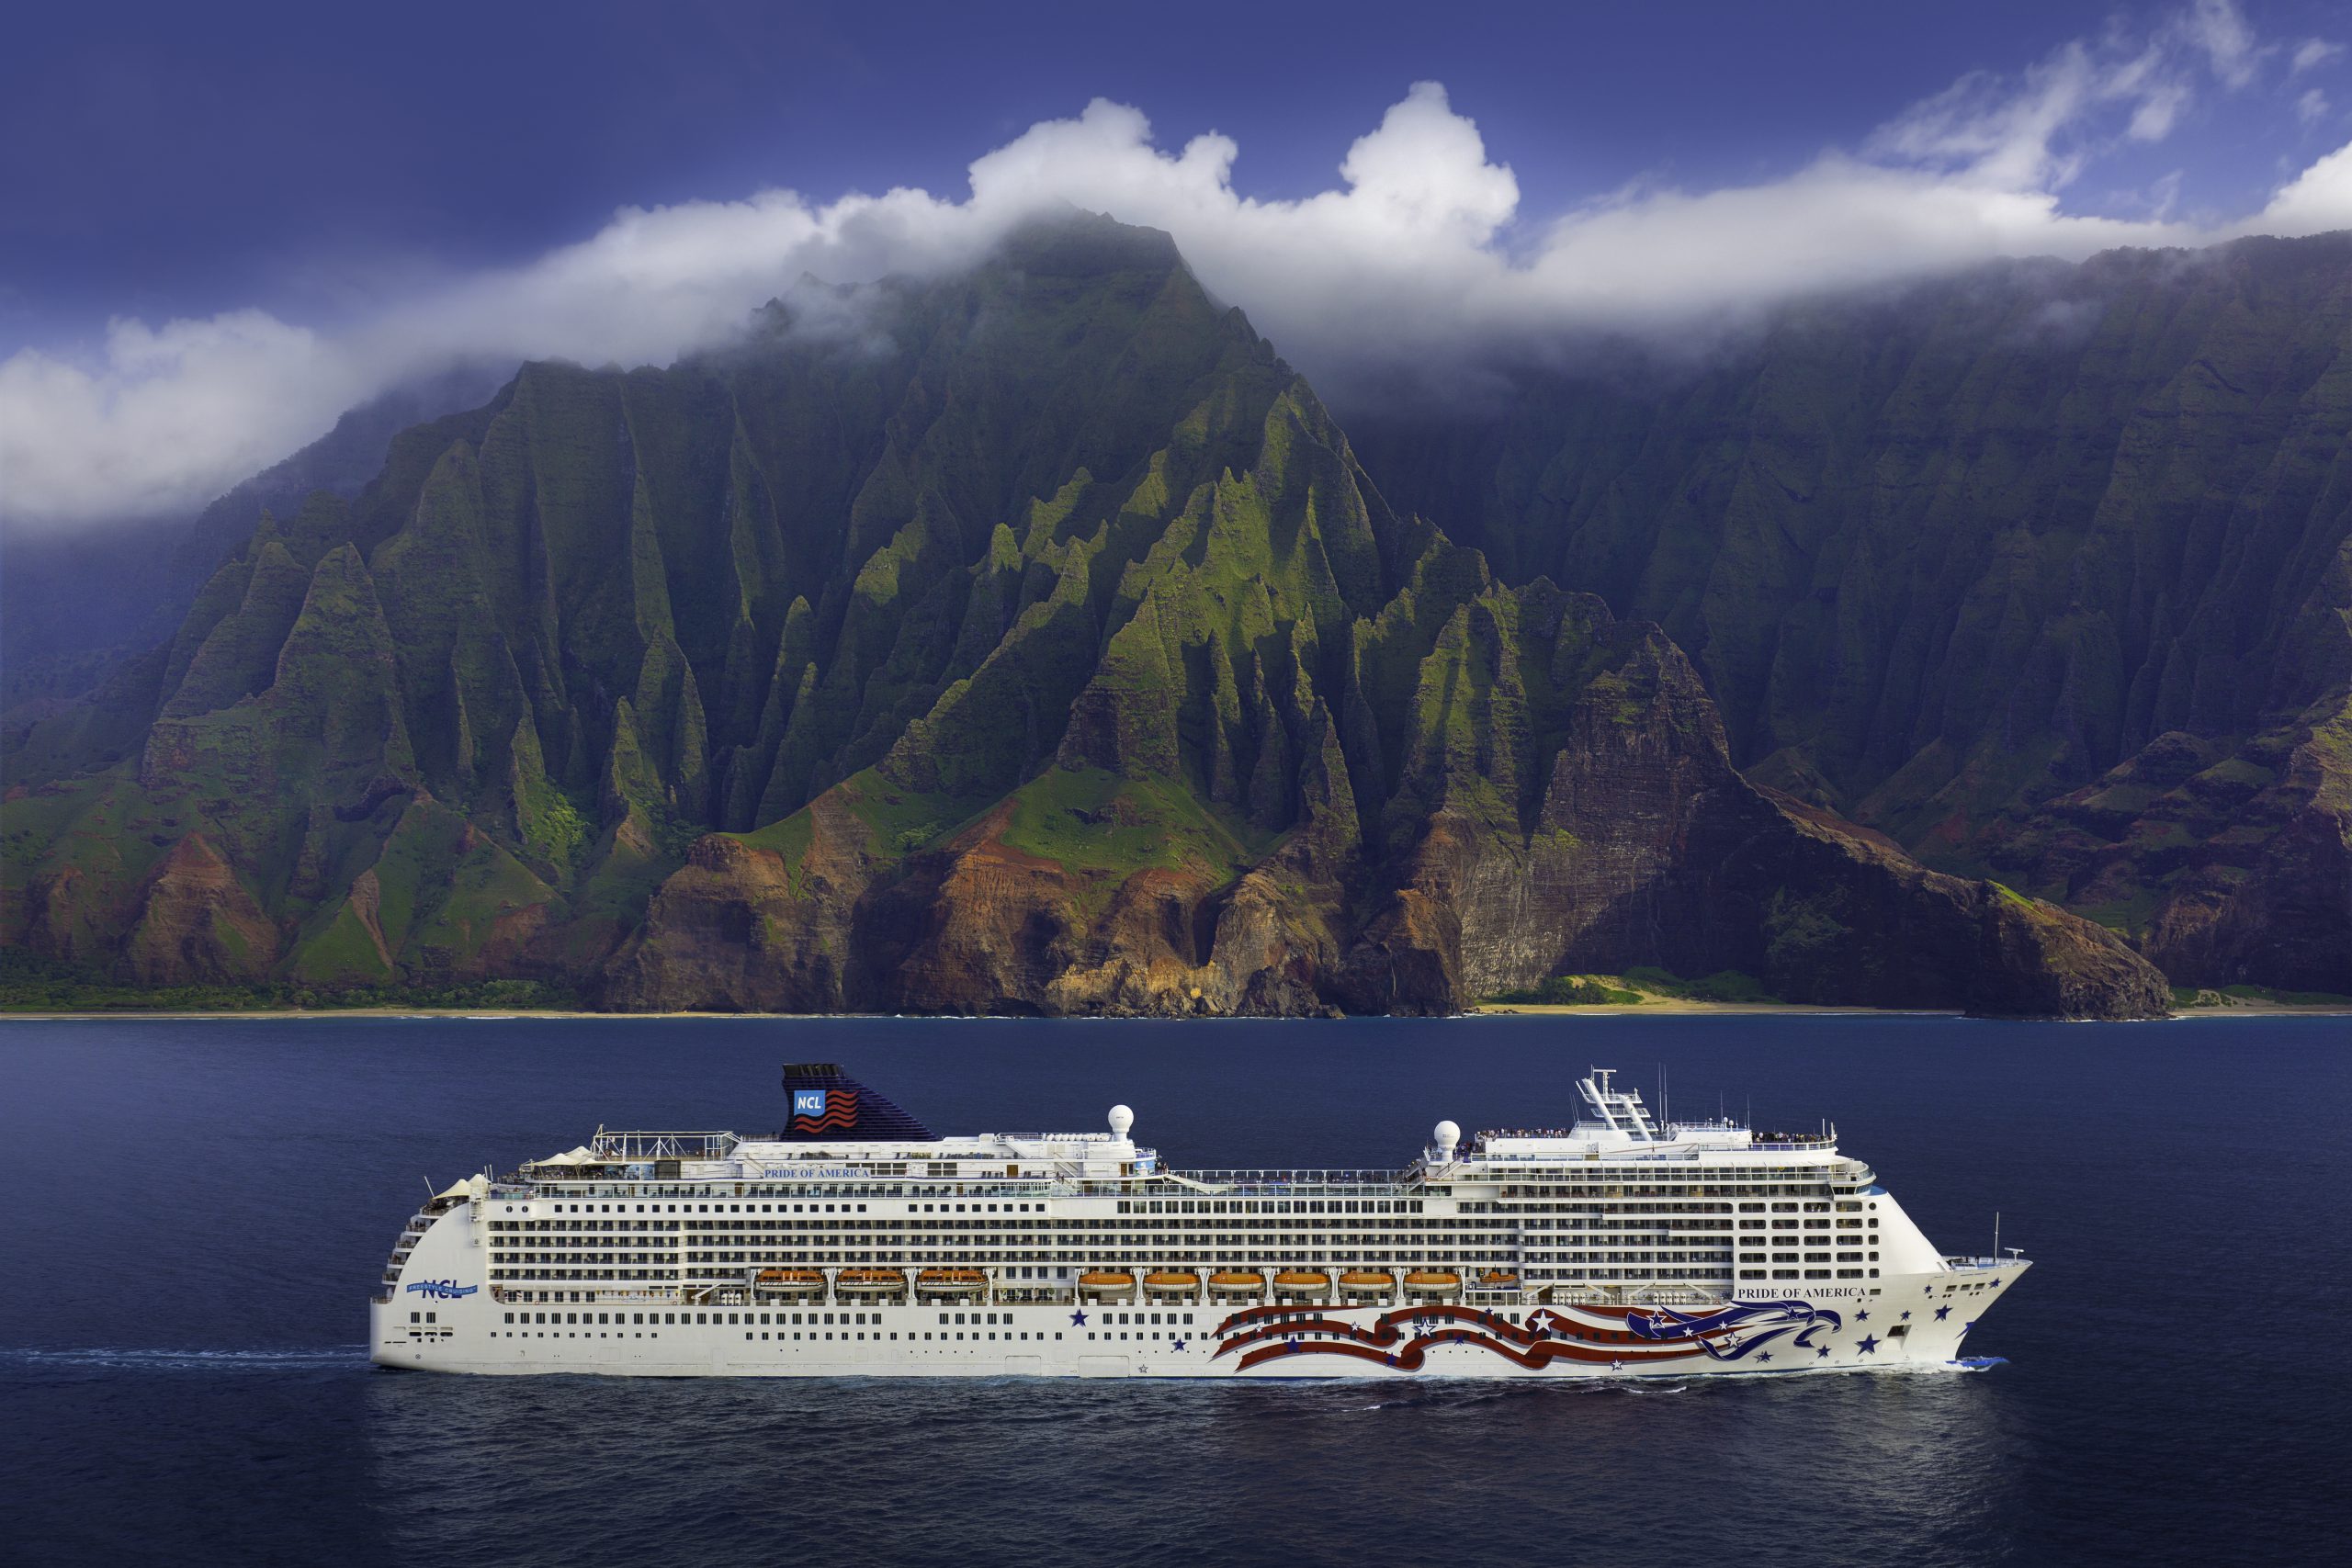 Book now and save up to 35 per cent on NCL's Hawaii cruises relaunching next year